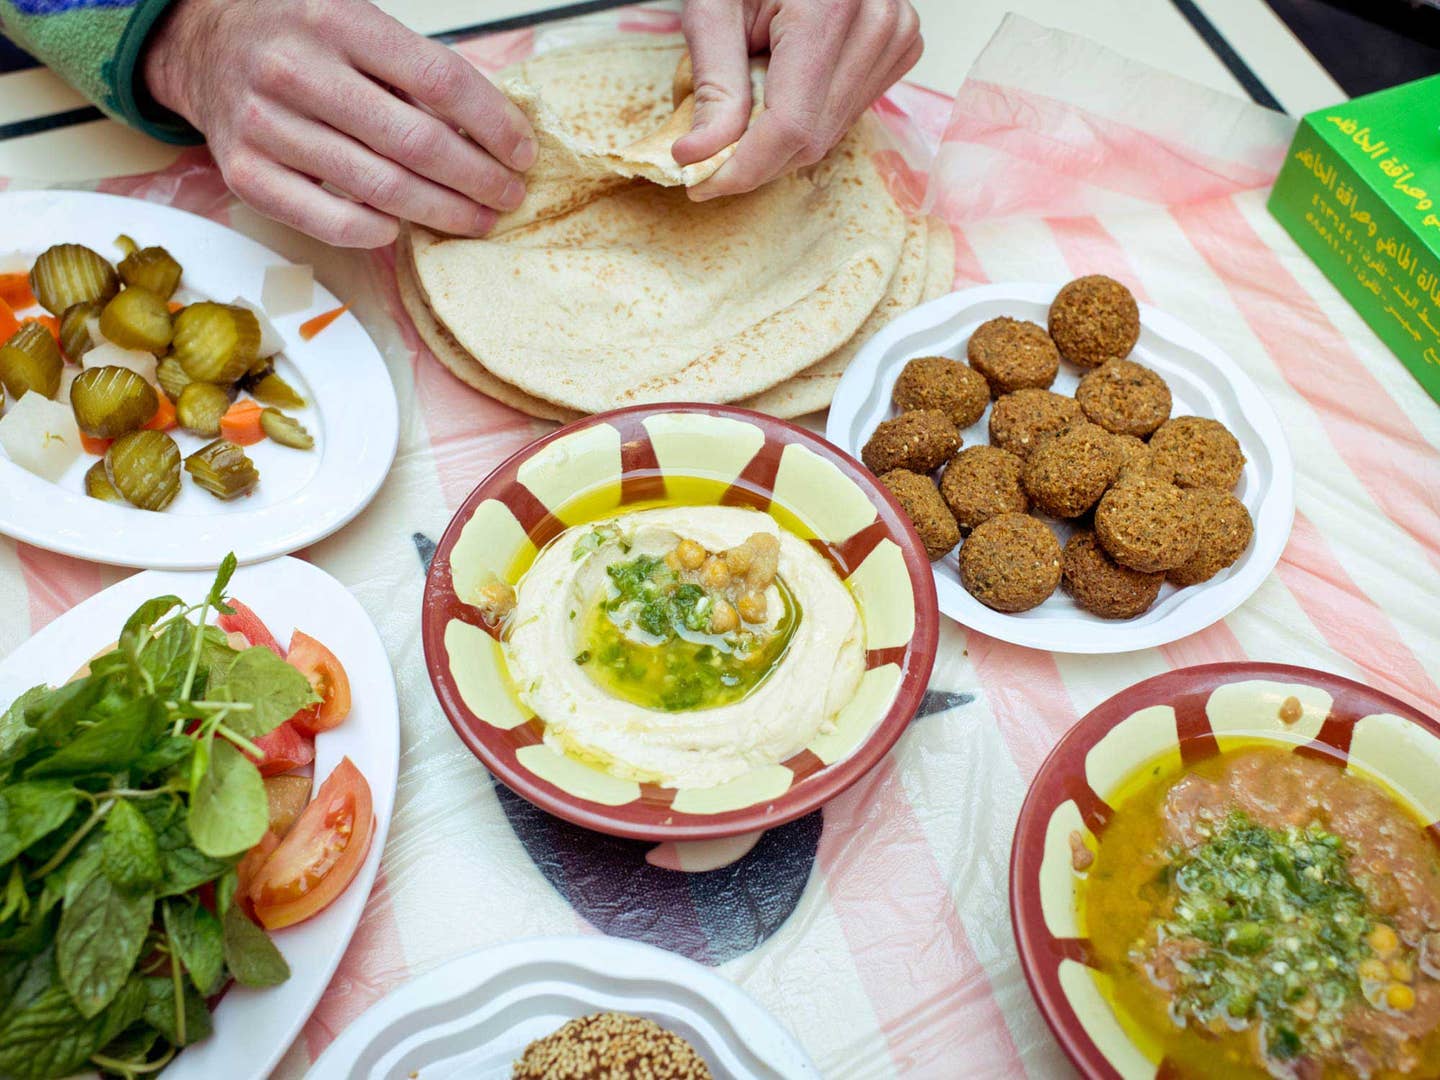 Everybody Loves Hashem: The Always Busy, Open-Air Jordanian Lunch Spot with No Menus